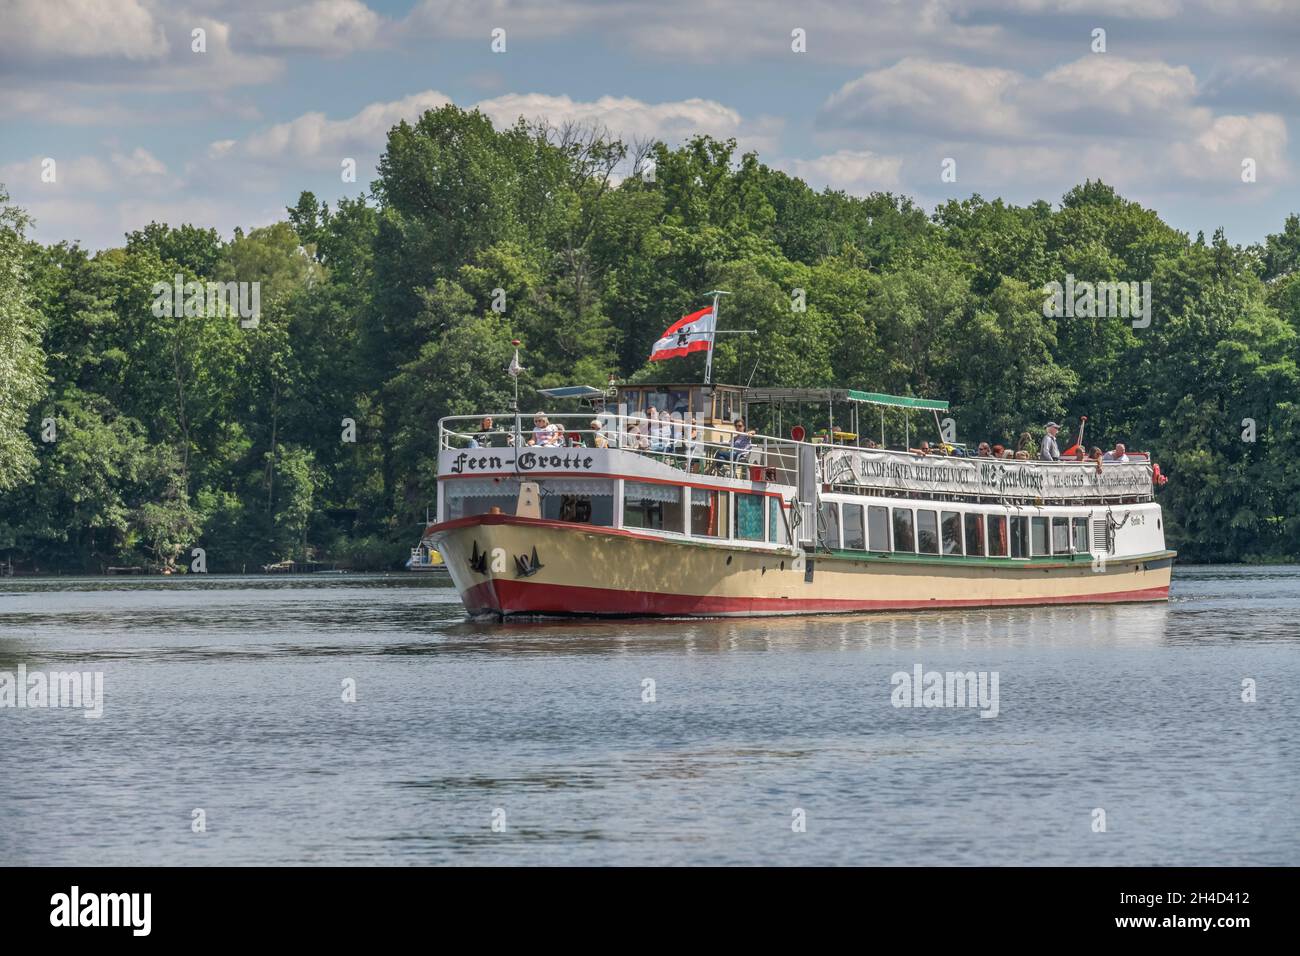 Ms feengrotte hi-res stock photography and images - Alamy